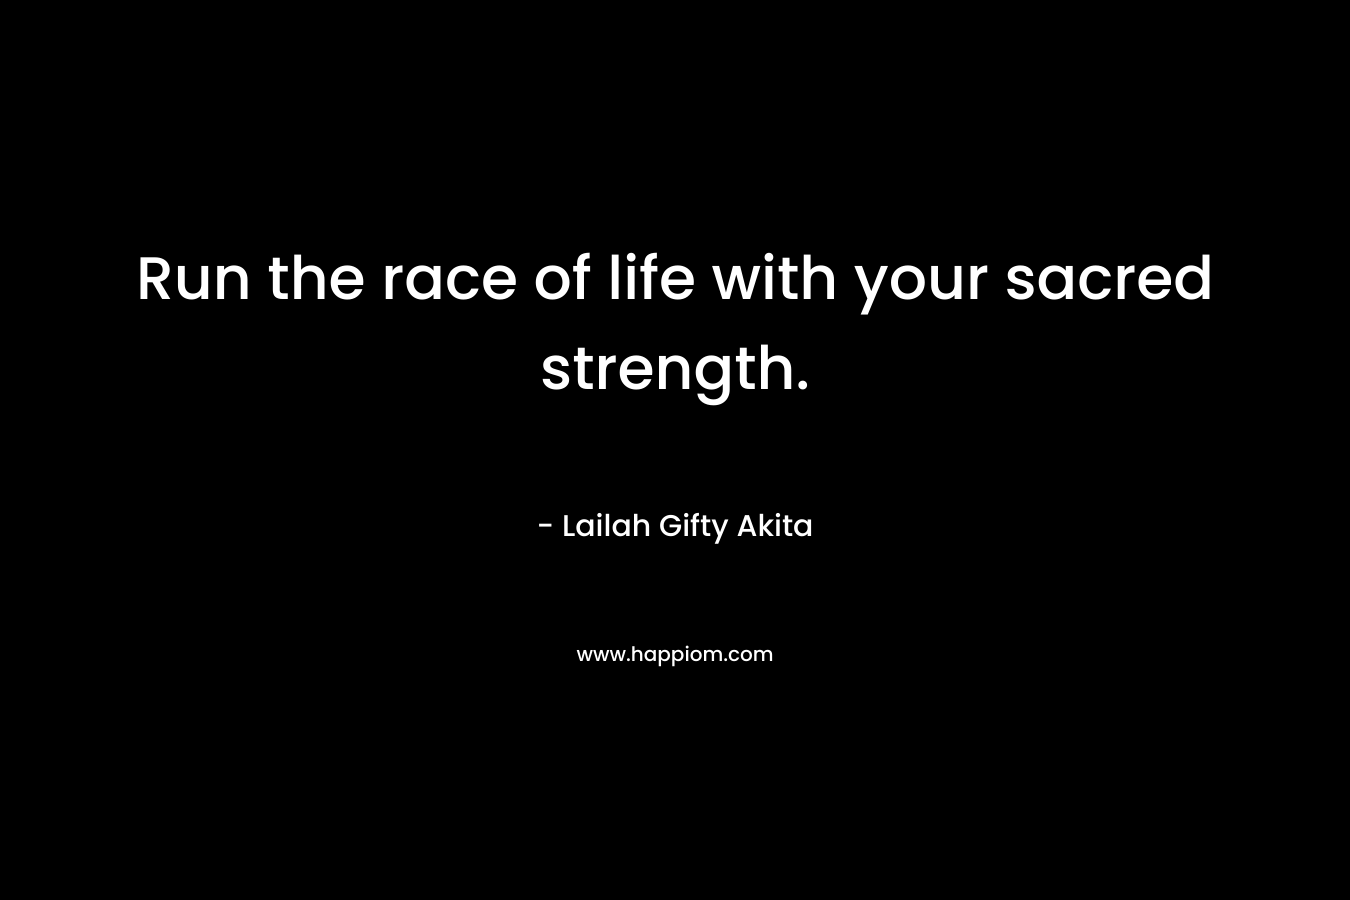 Run the race of life with your sacred strength.